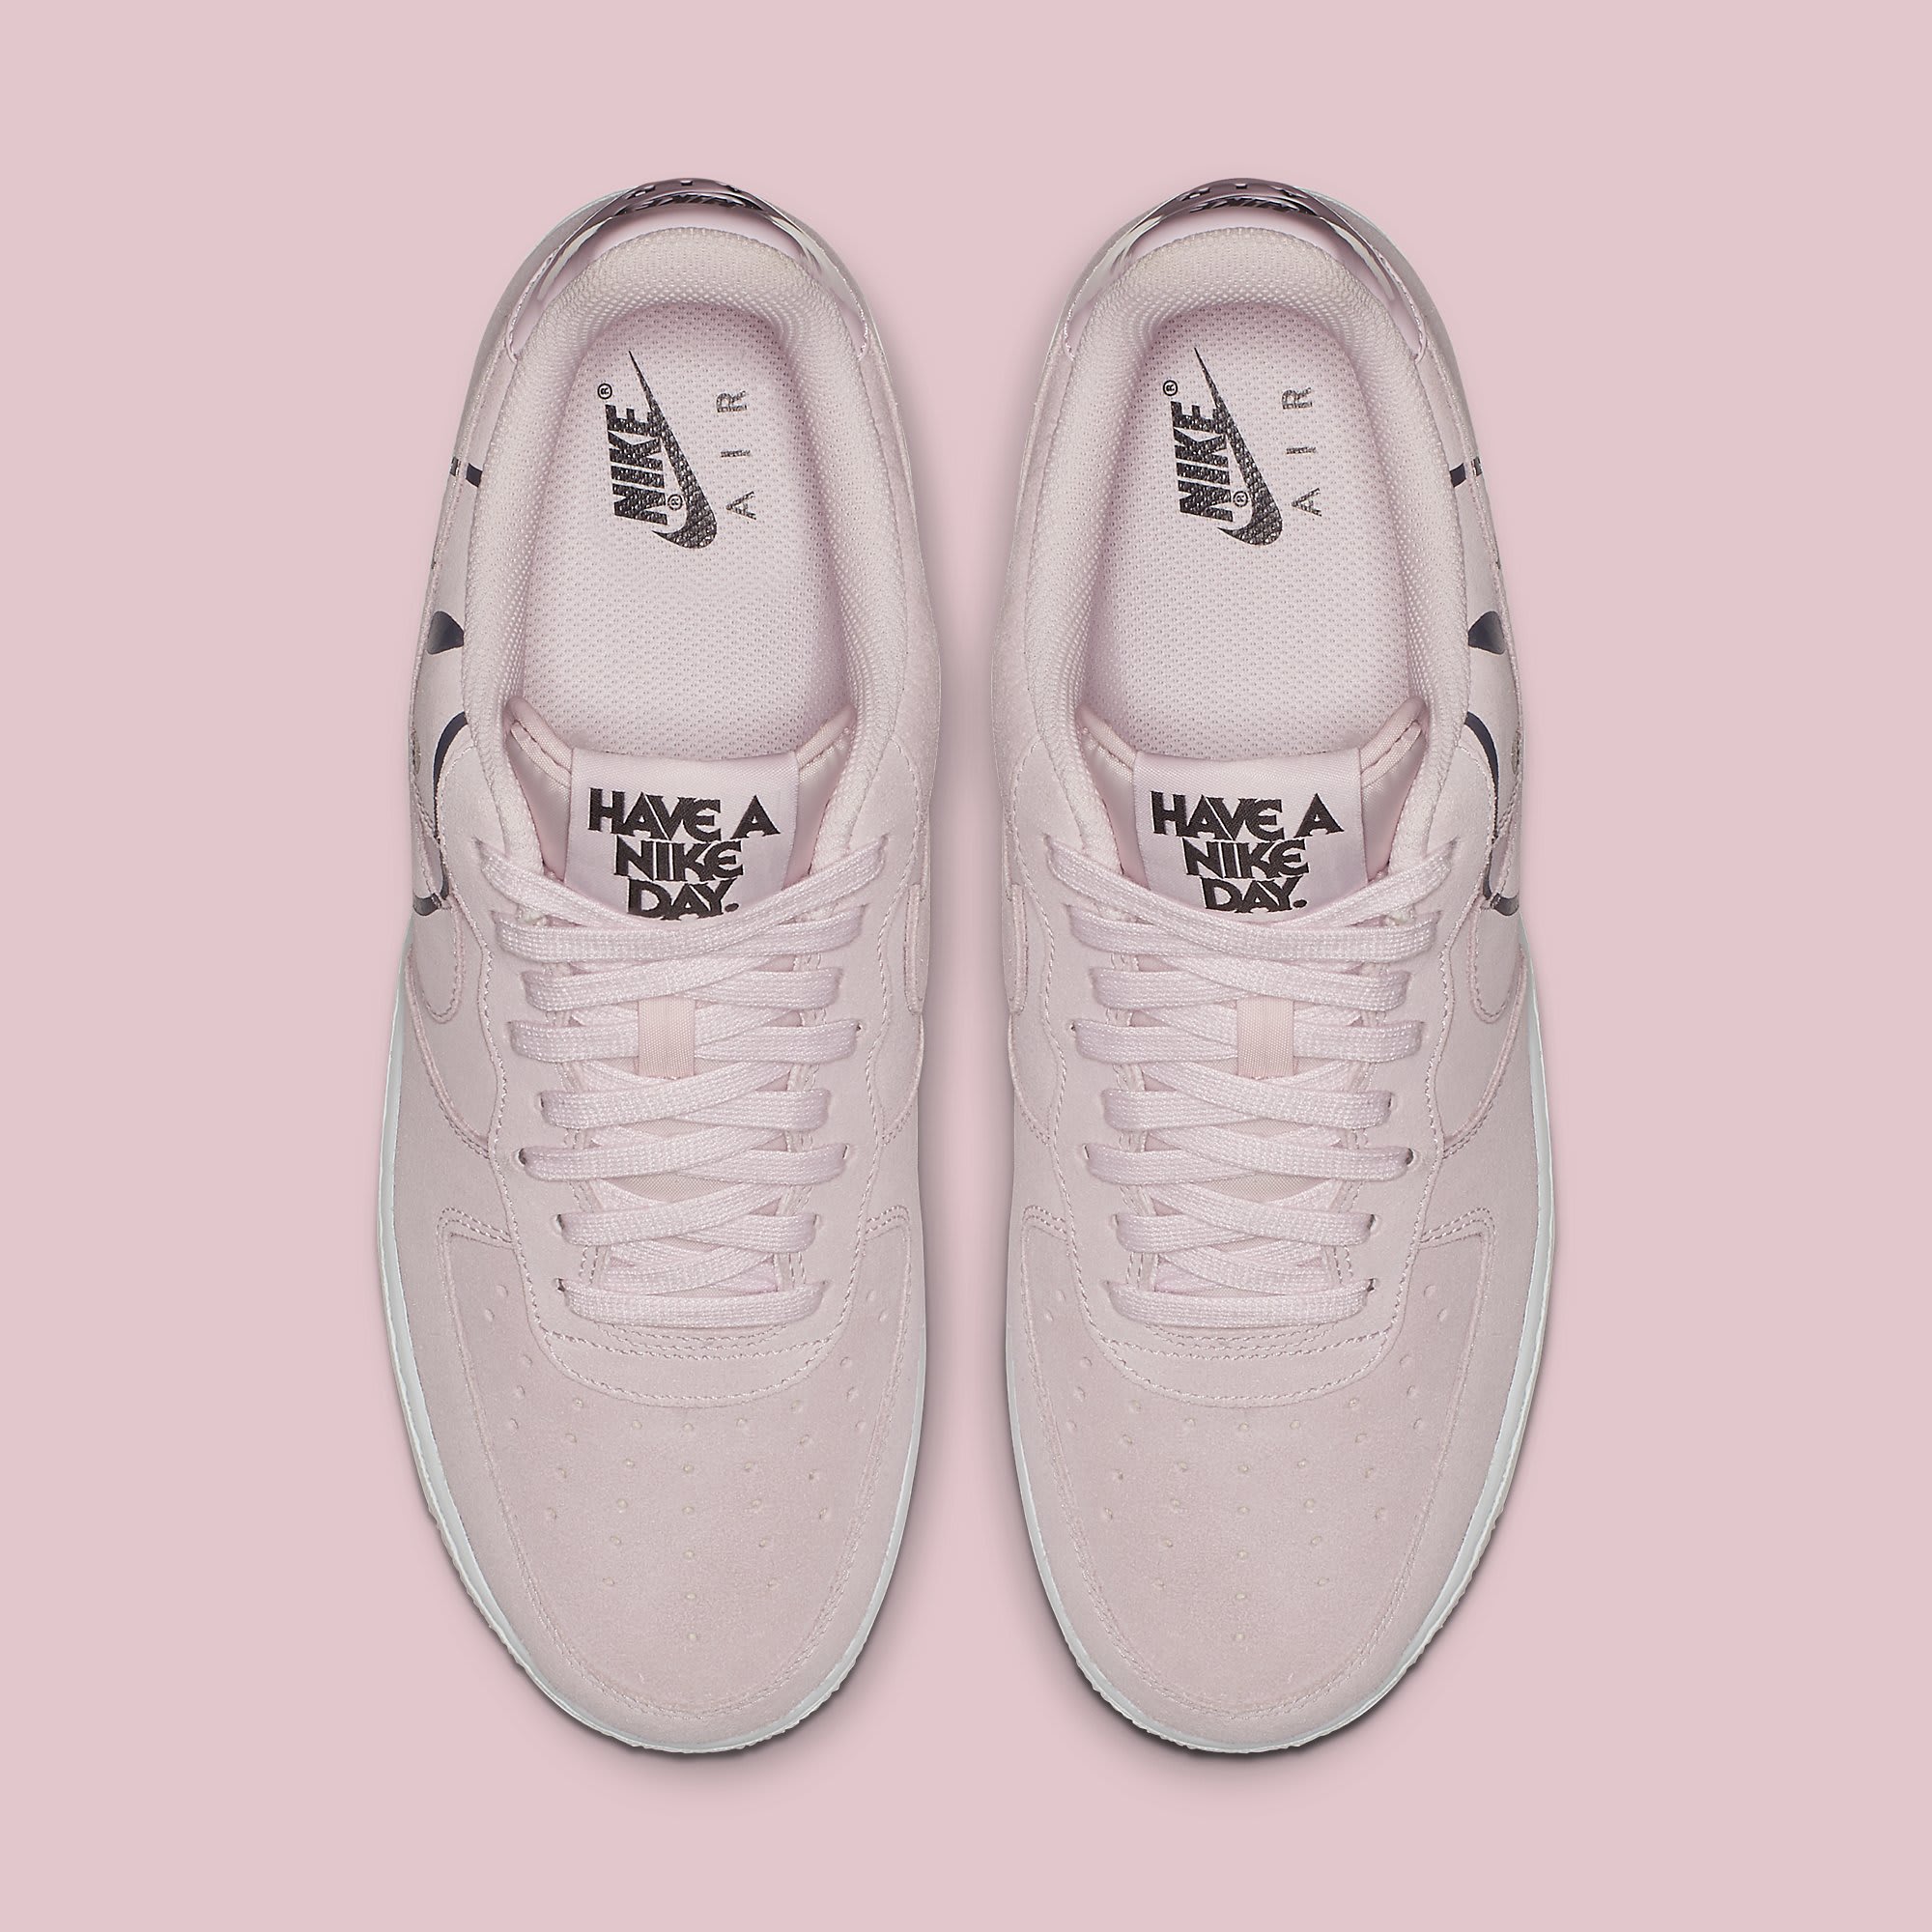 nike-air-force-1-low-have-a-nike-day-pink-bq9044-600-top